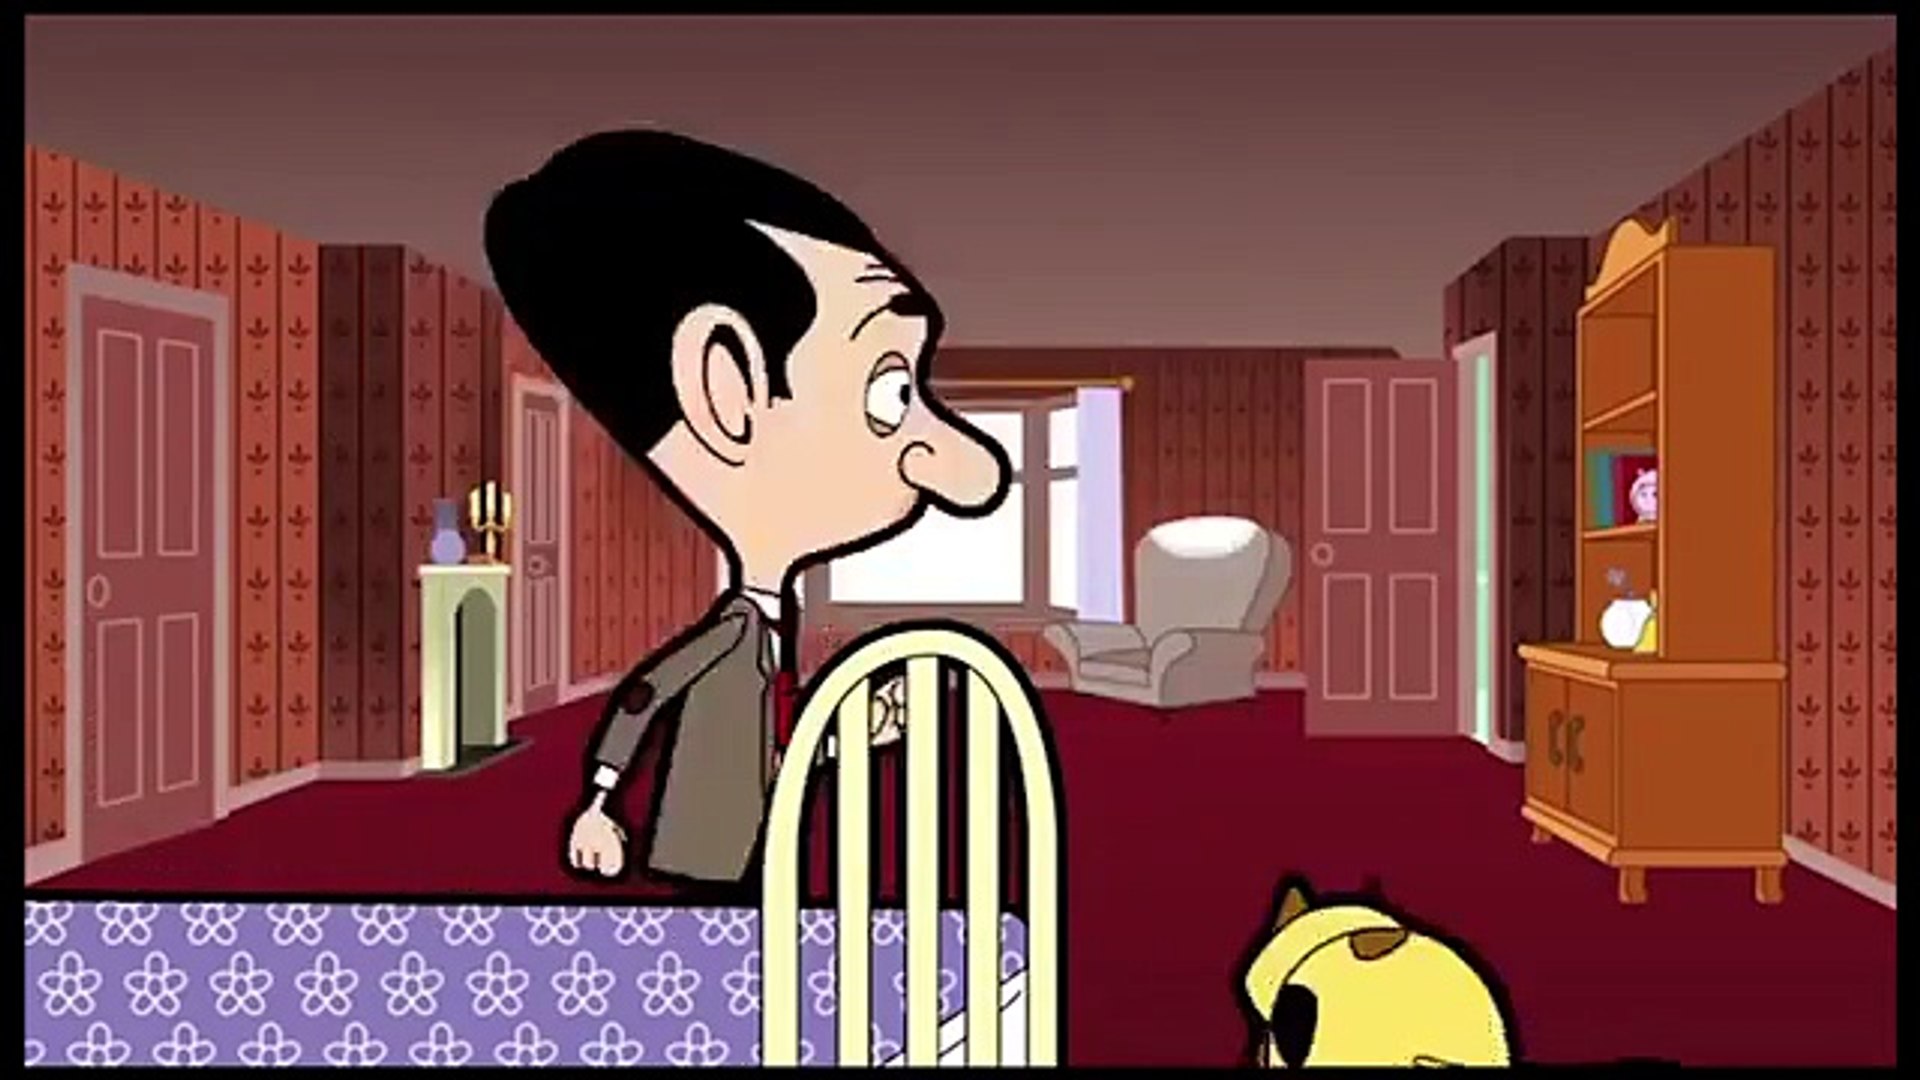 Mr bean cartoon in hindi 2017 | Mr bean cartoon in hindi new episodes Part  42 - Dailymotion Video